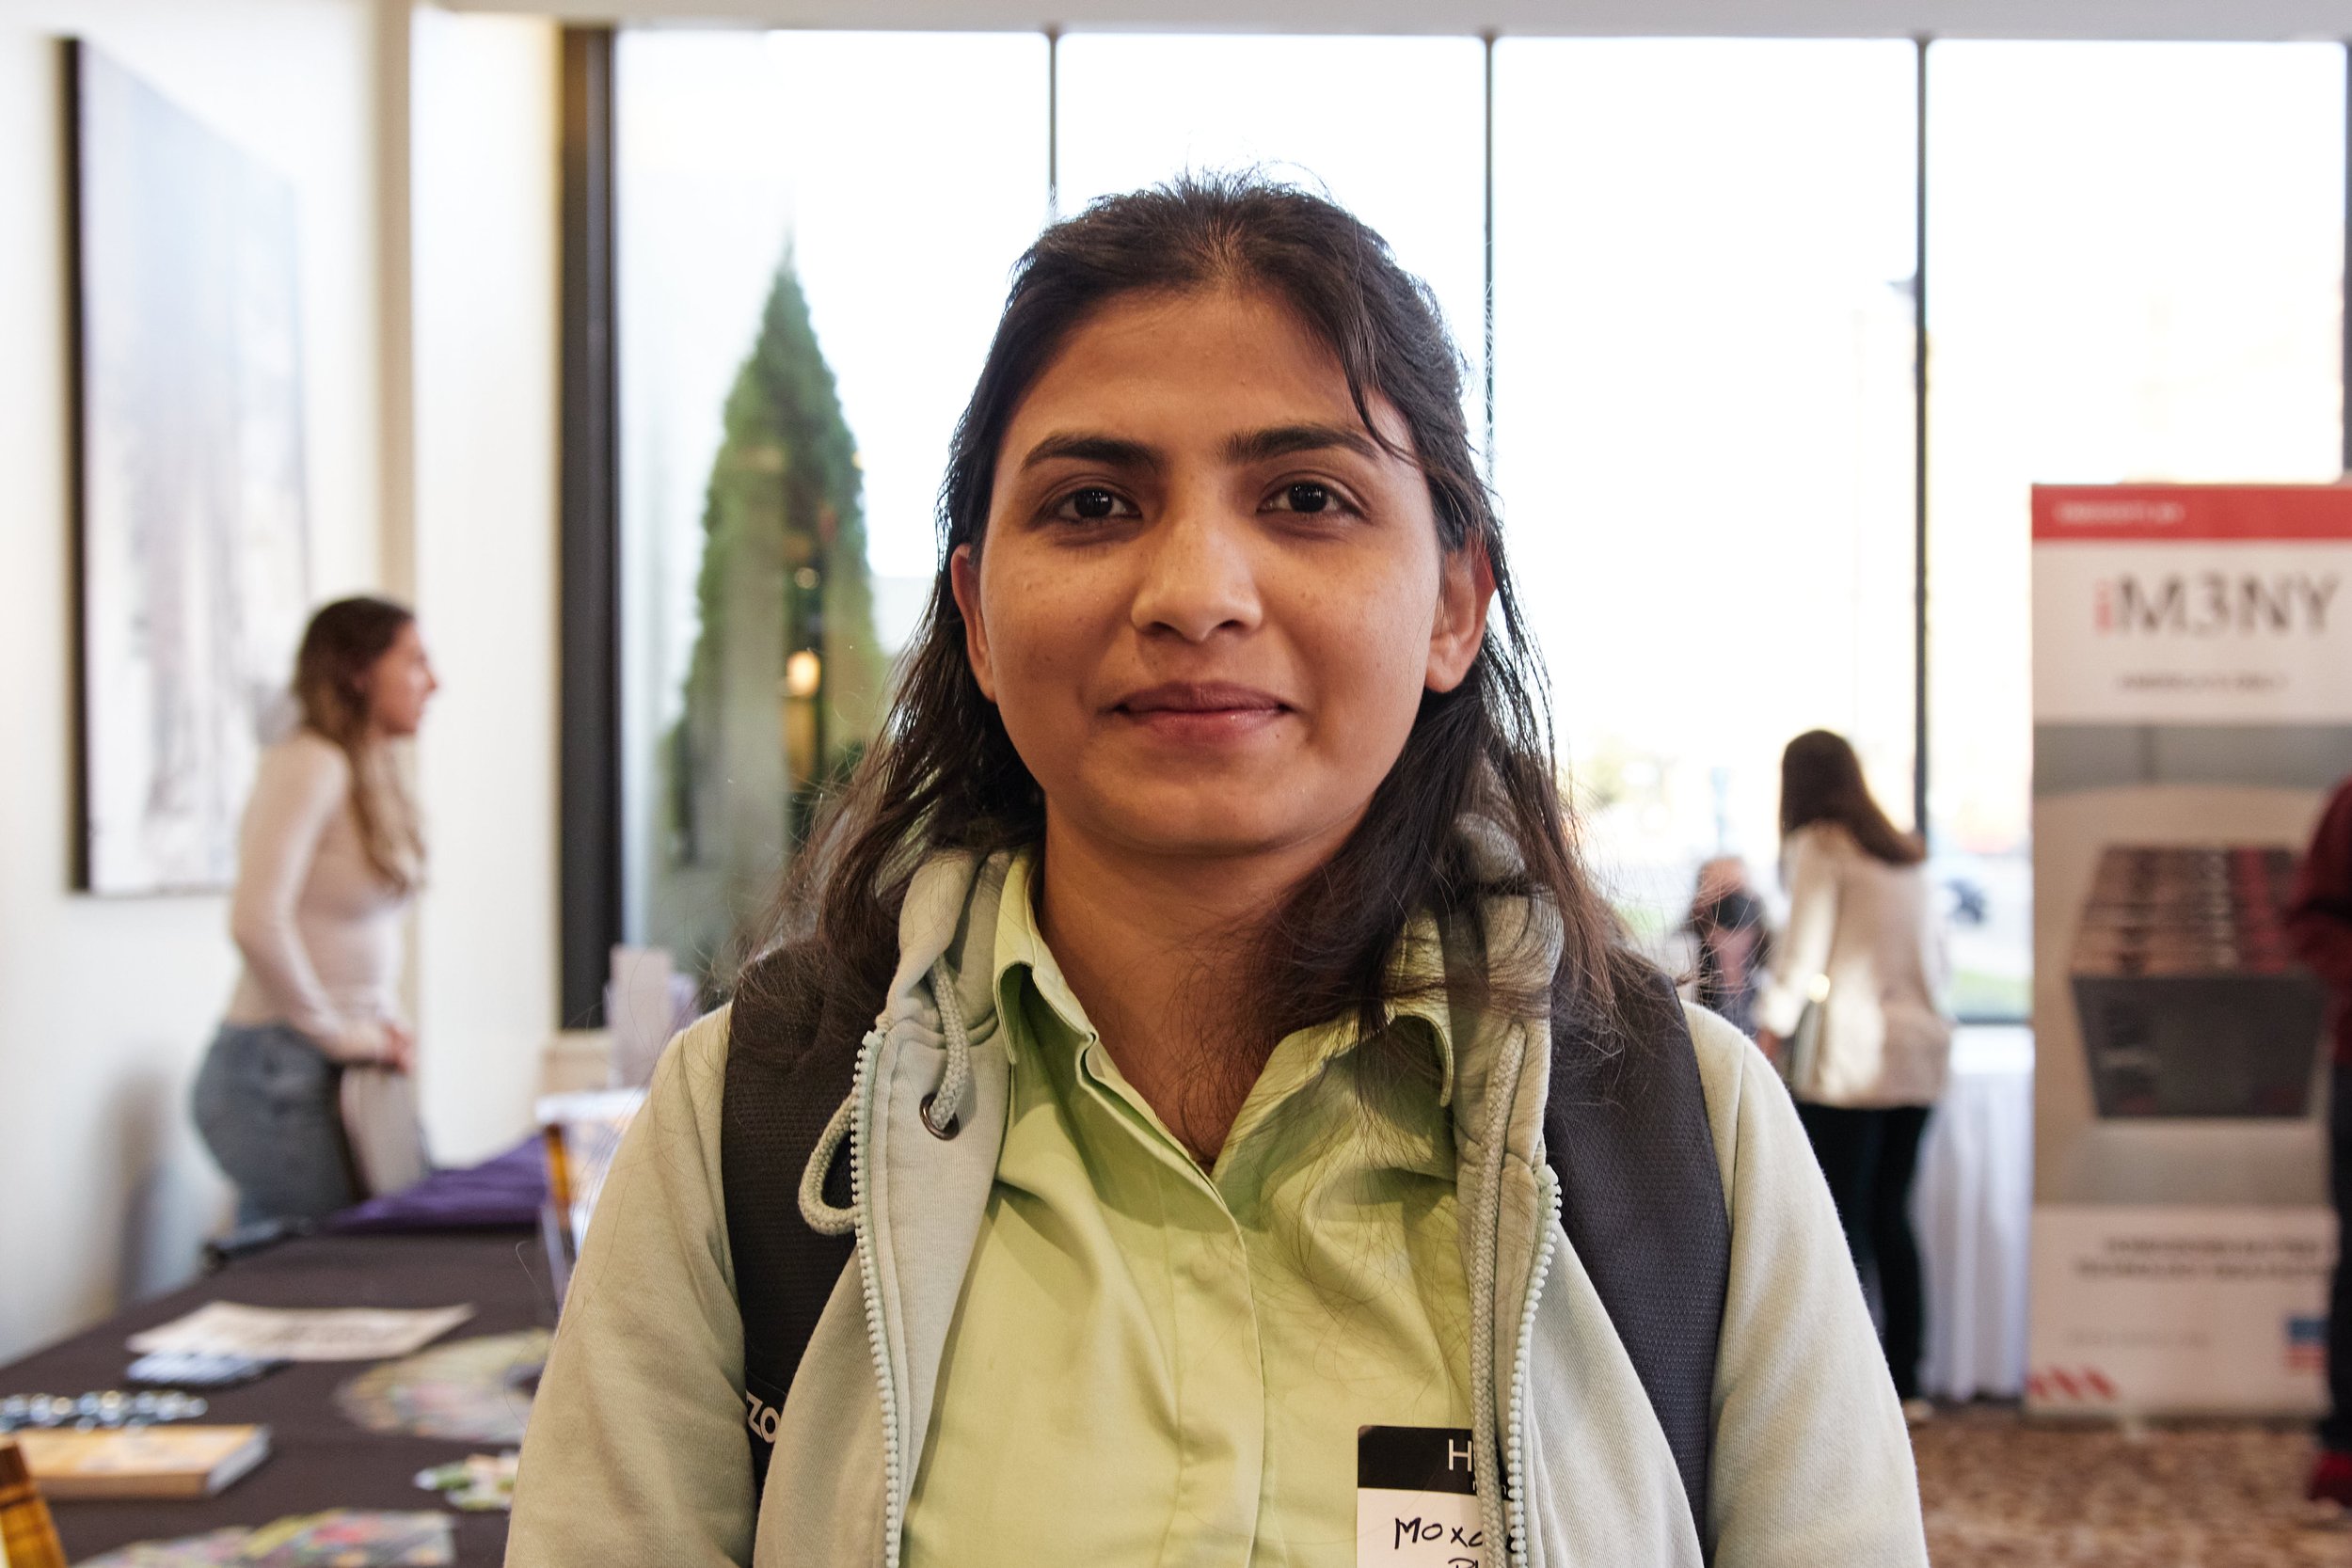    “I am looking for an electrical engineering job, so that’s why I came to the green energy career fair. Right now, my dream job is [becoming an] electrical engineer or systems engineer or a technical support engineer.”     - Moxanki, Graduate Stude